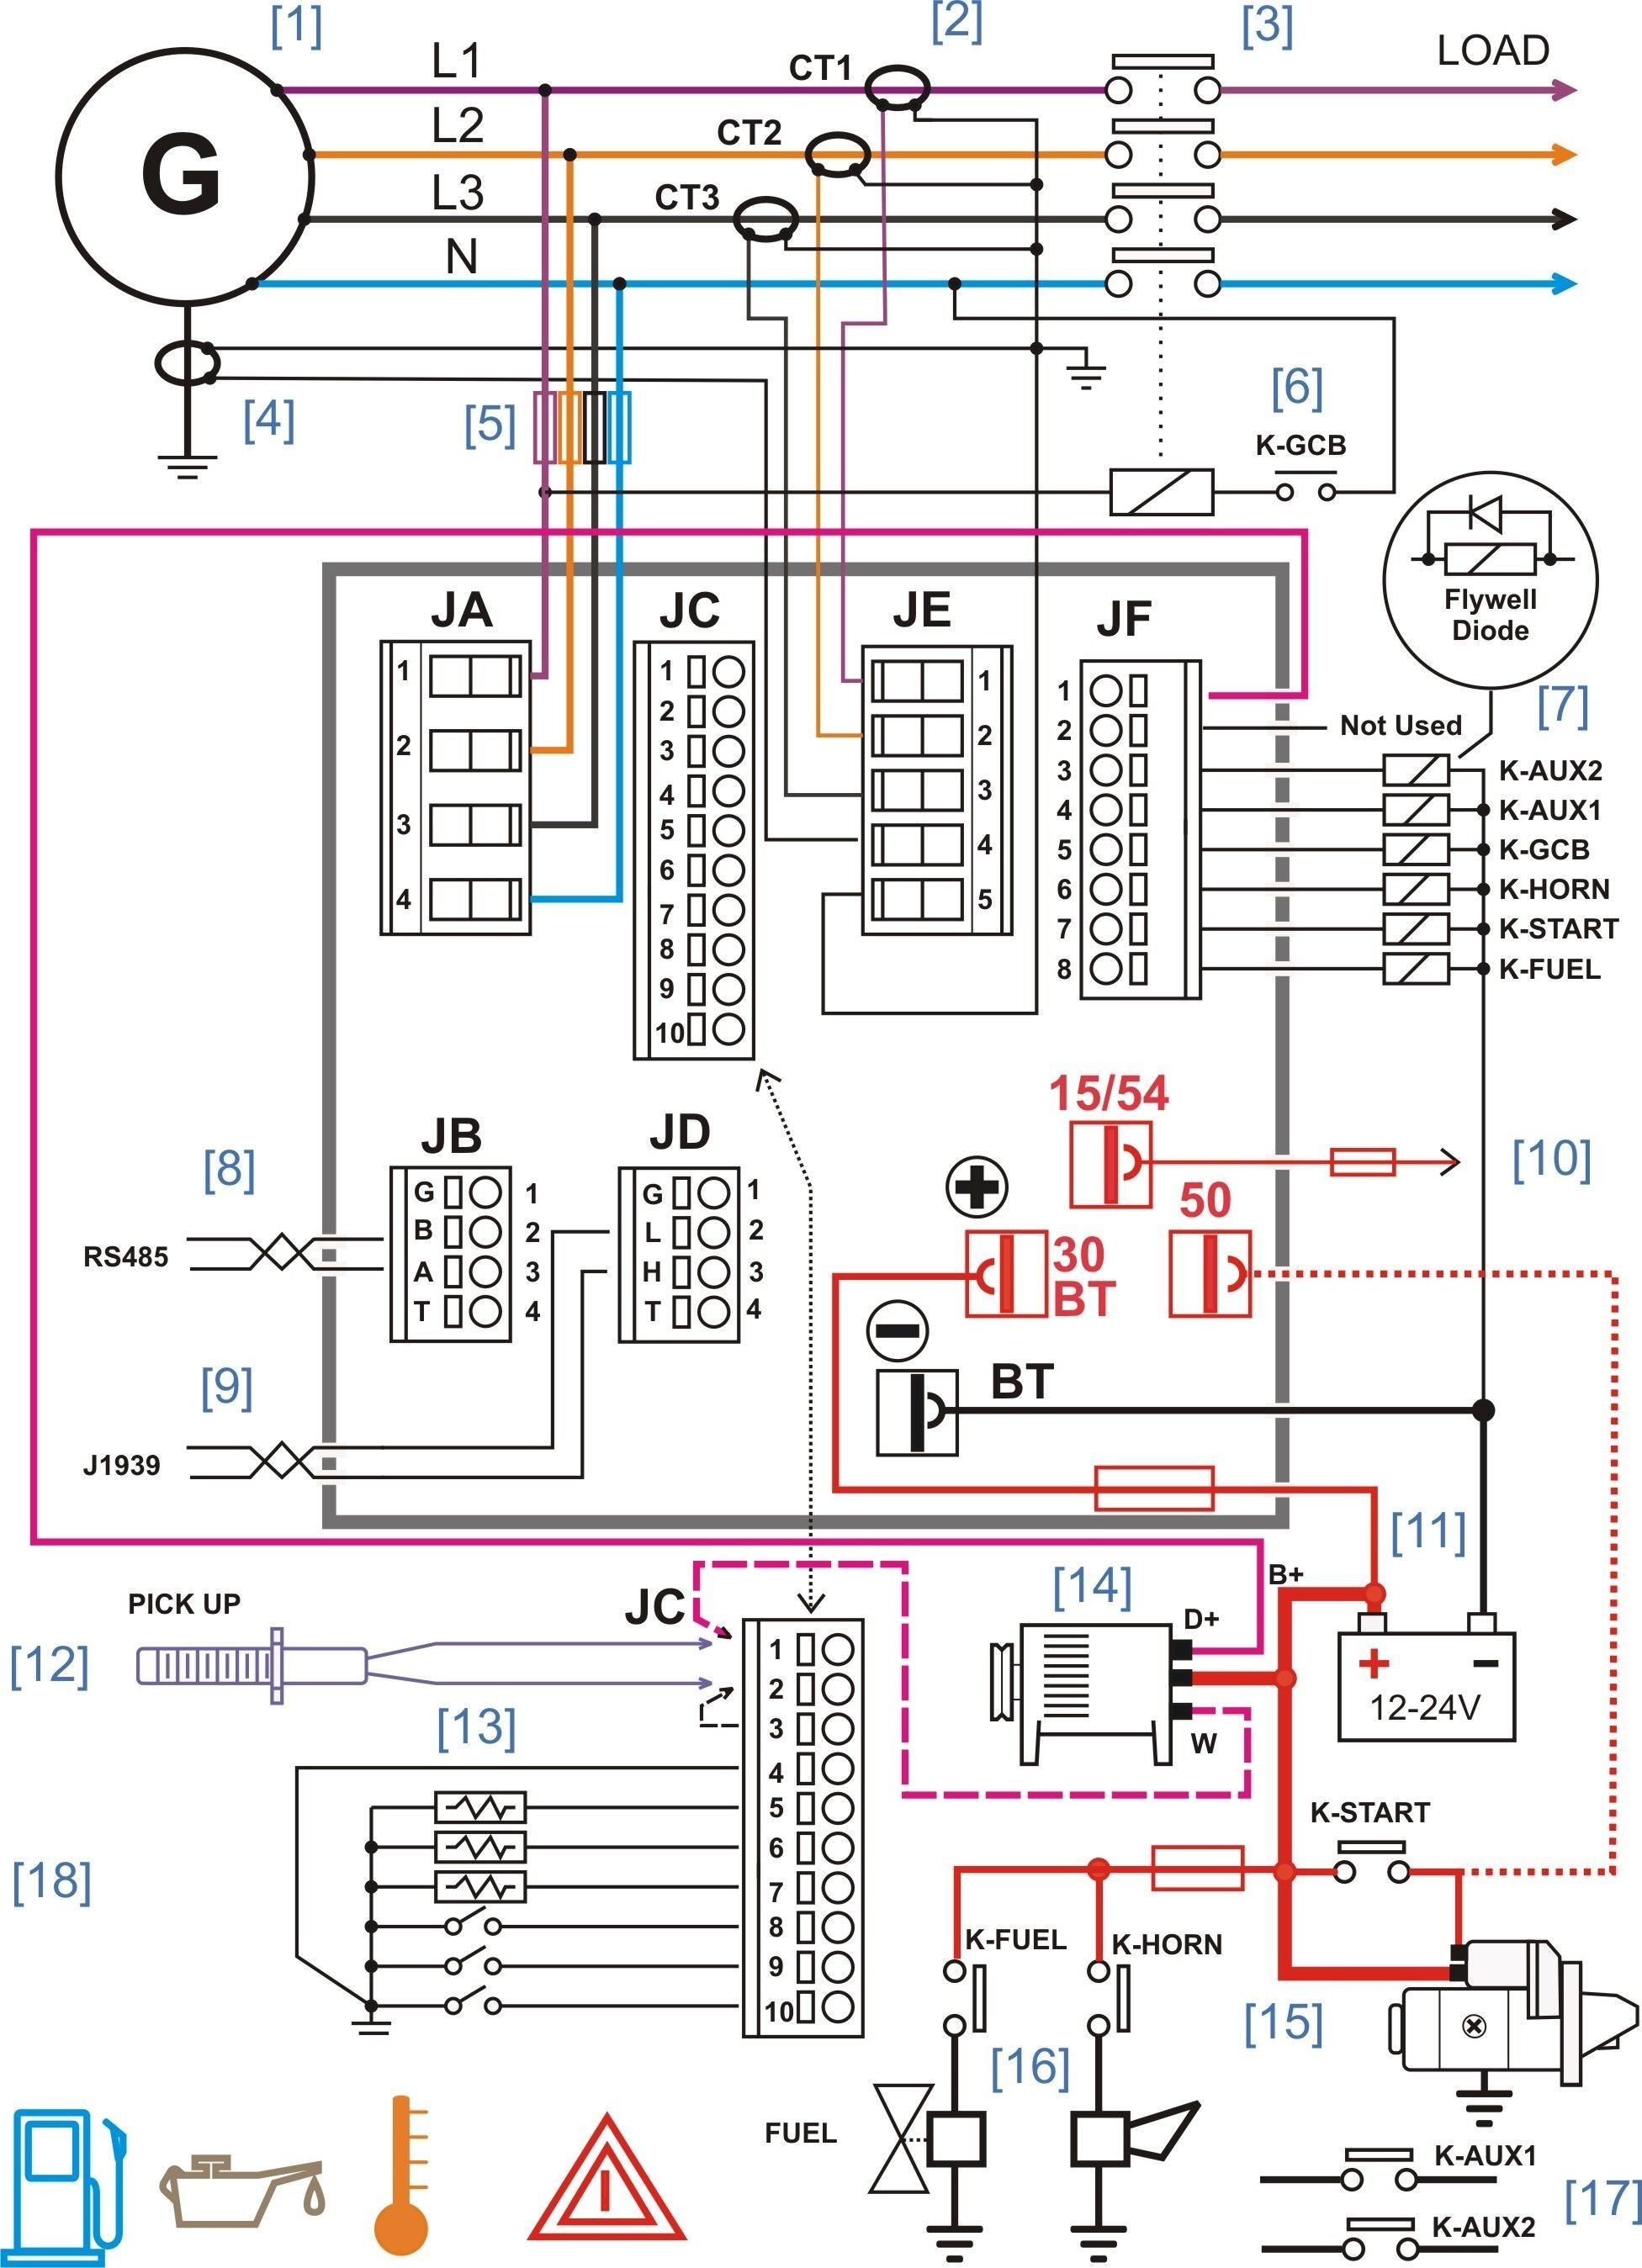 Electrical House Wiring Diagram Software Best Electrical Floor Plan Unique Home Electrical Wiring Diagrams House